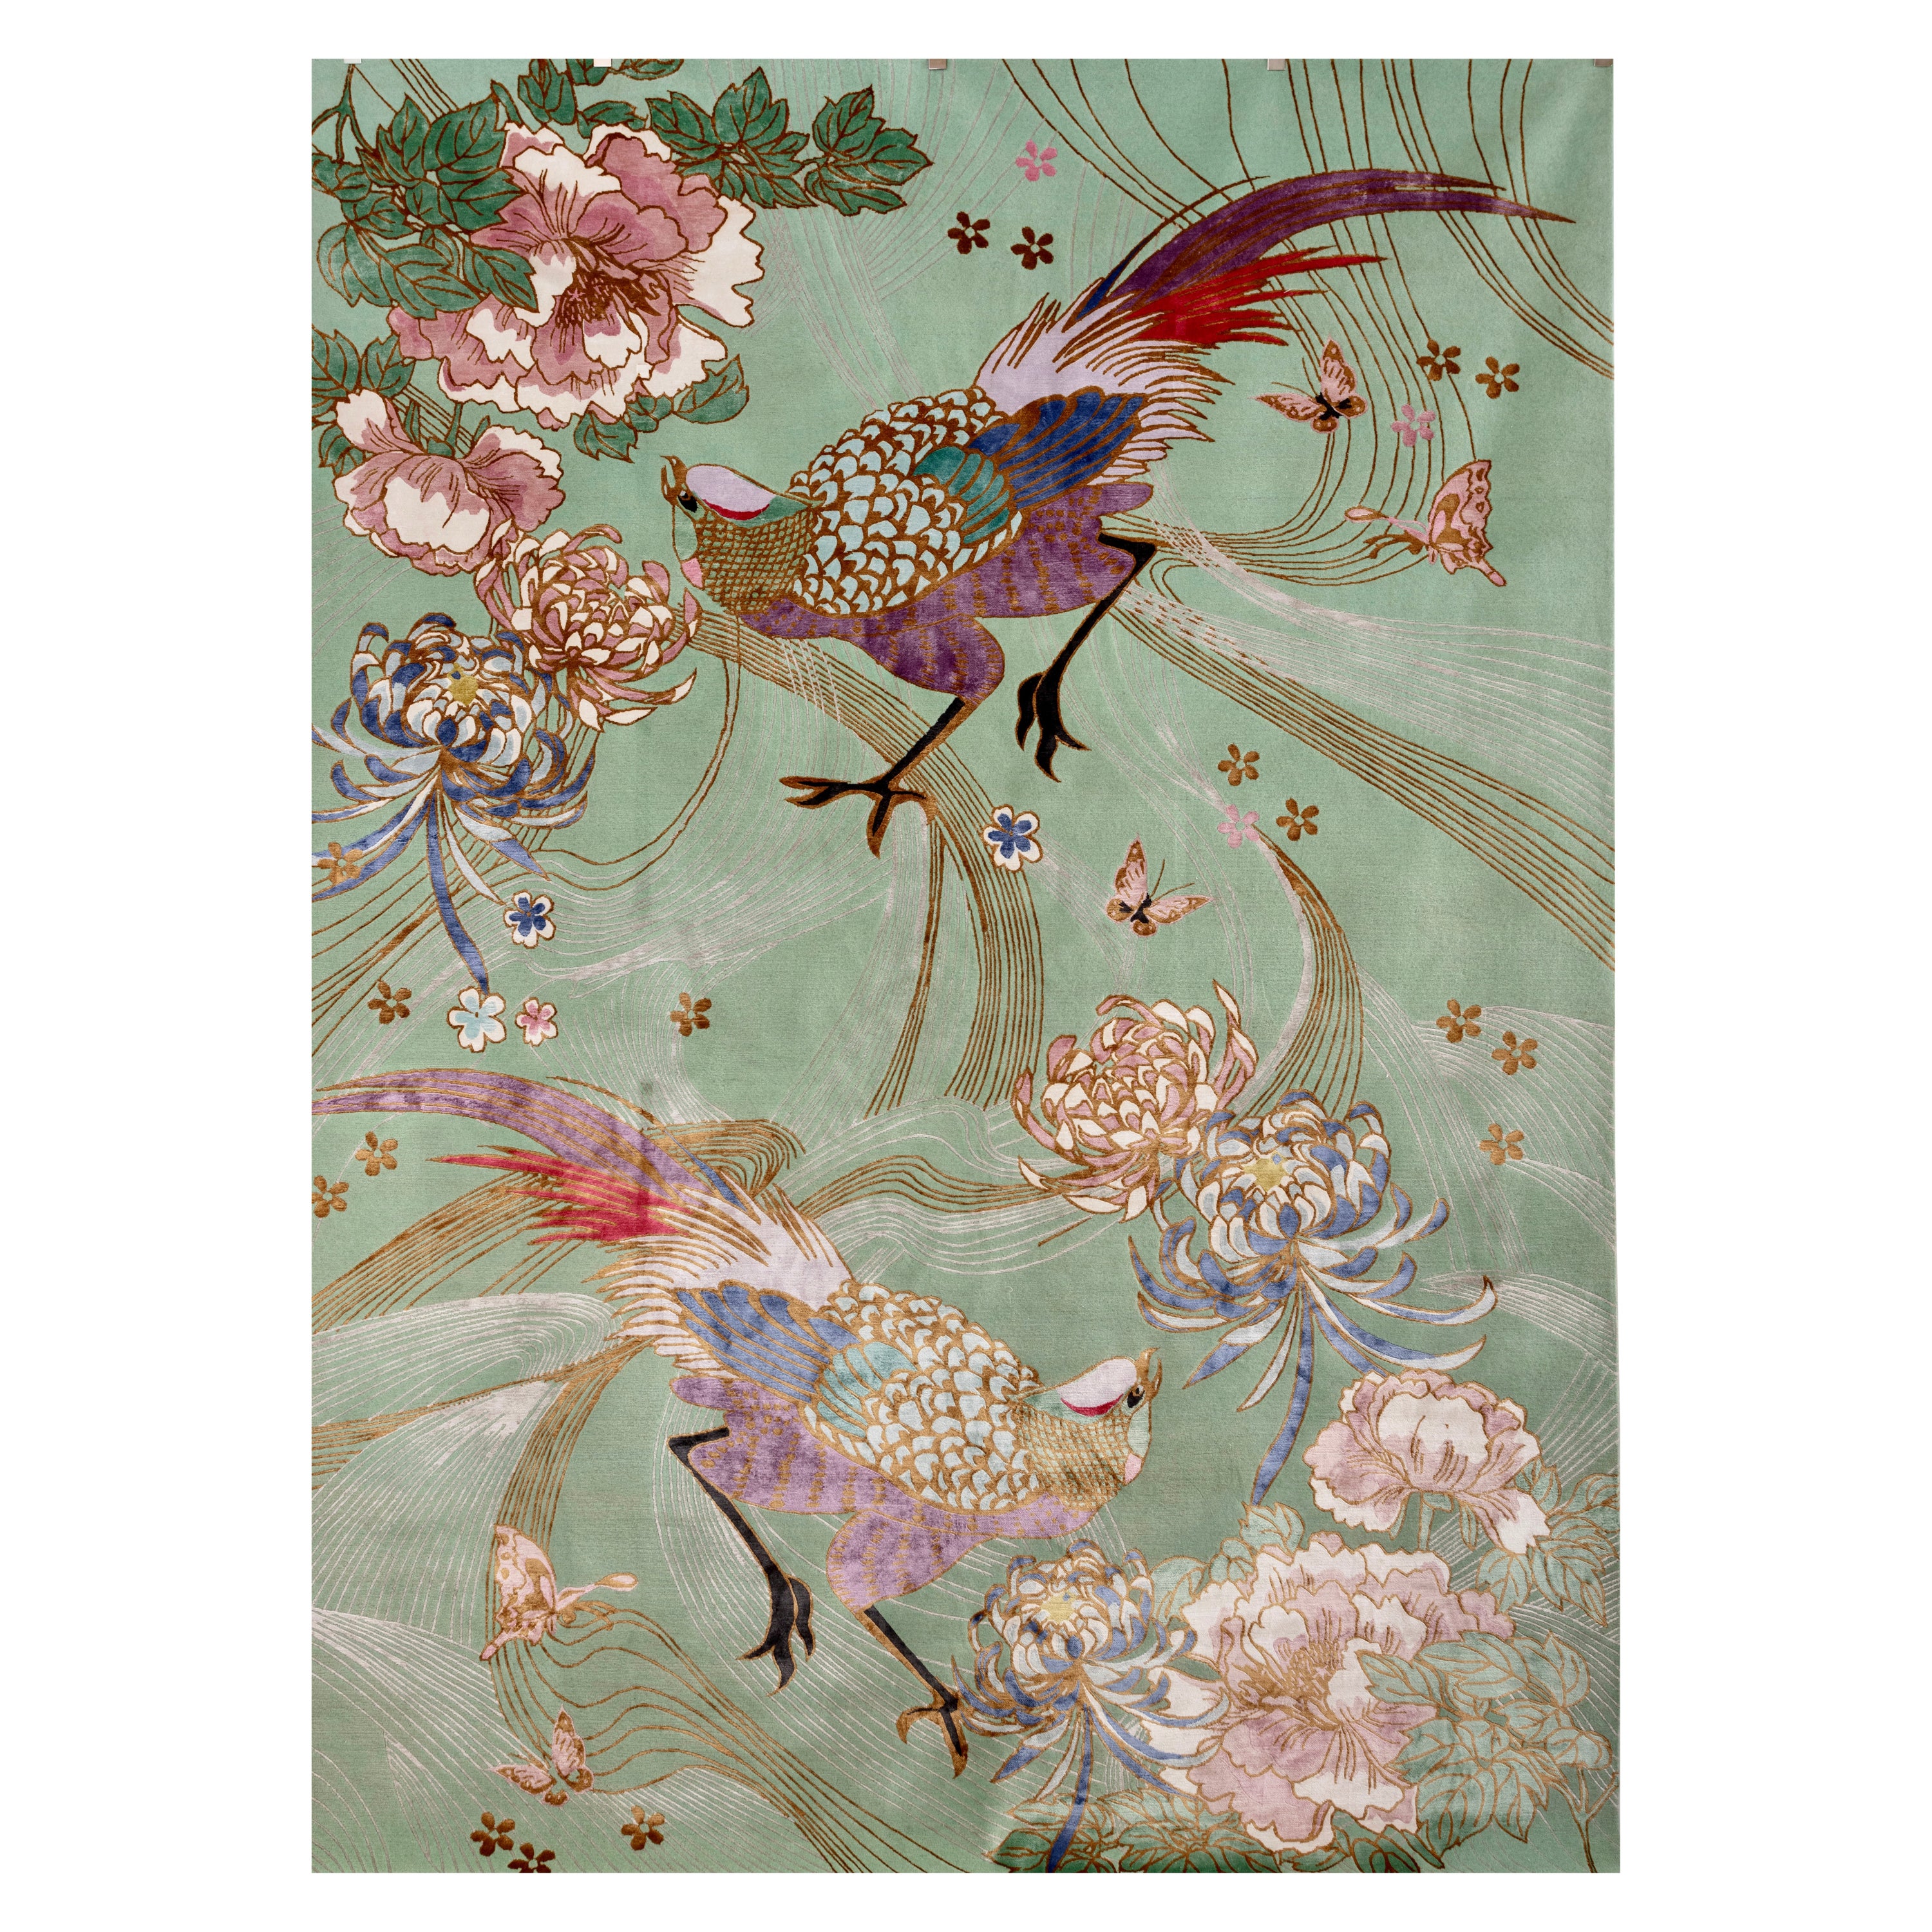 In celebration of Art Deco style and Chinoiserie design – Wendy